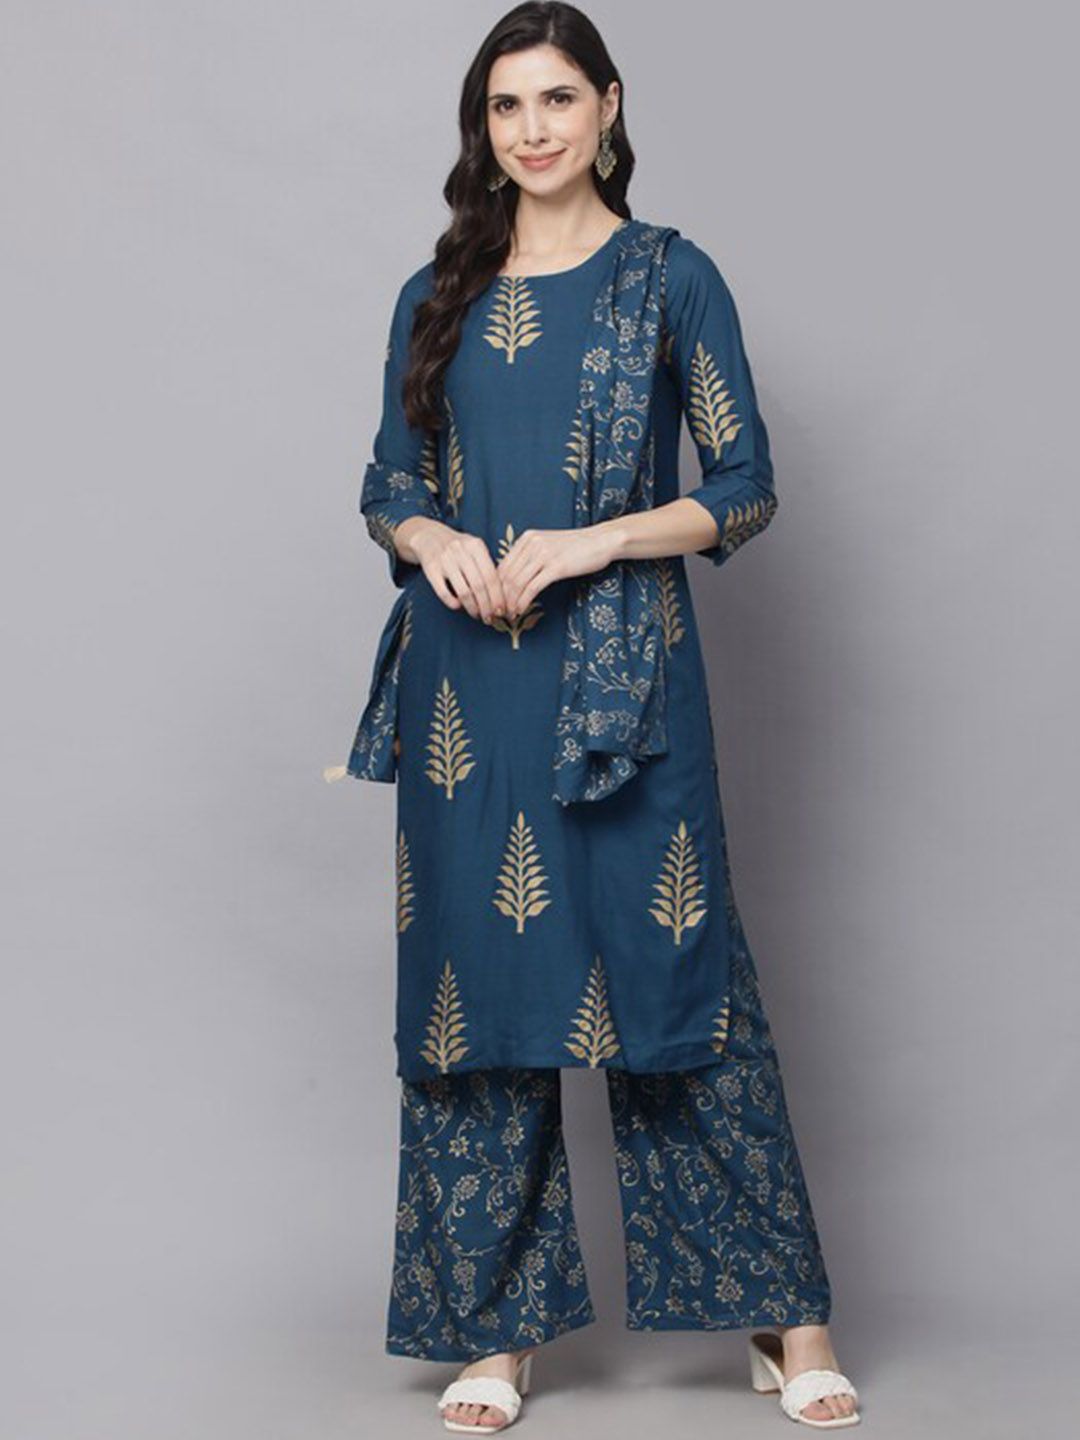 SURHI Women Turquoise Blue Printed Regular Kurta with Palazzos & With Dupatta Price in India